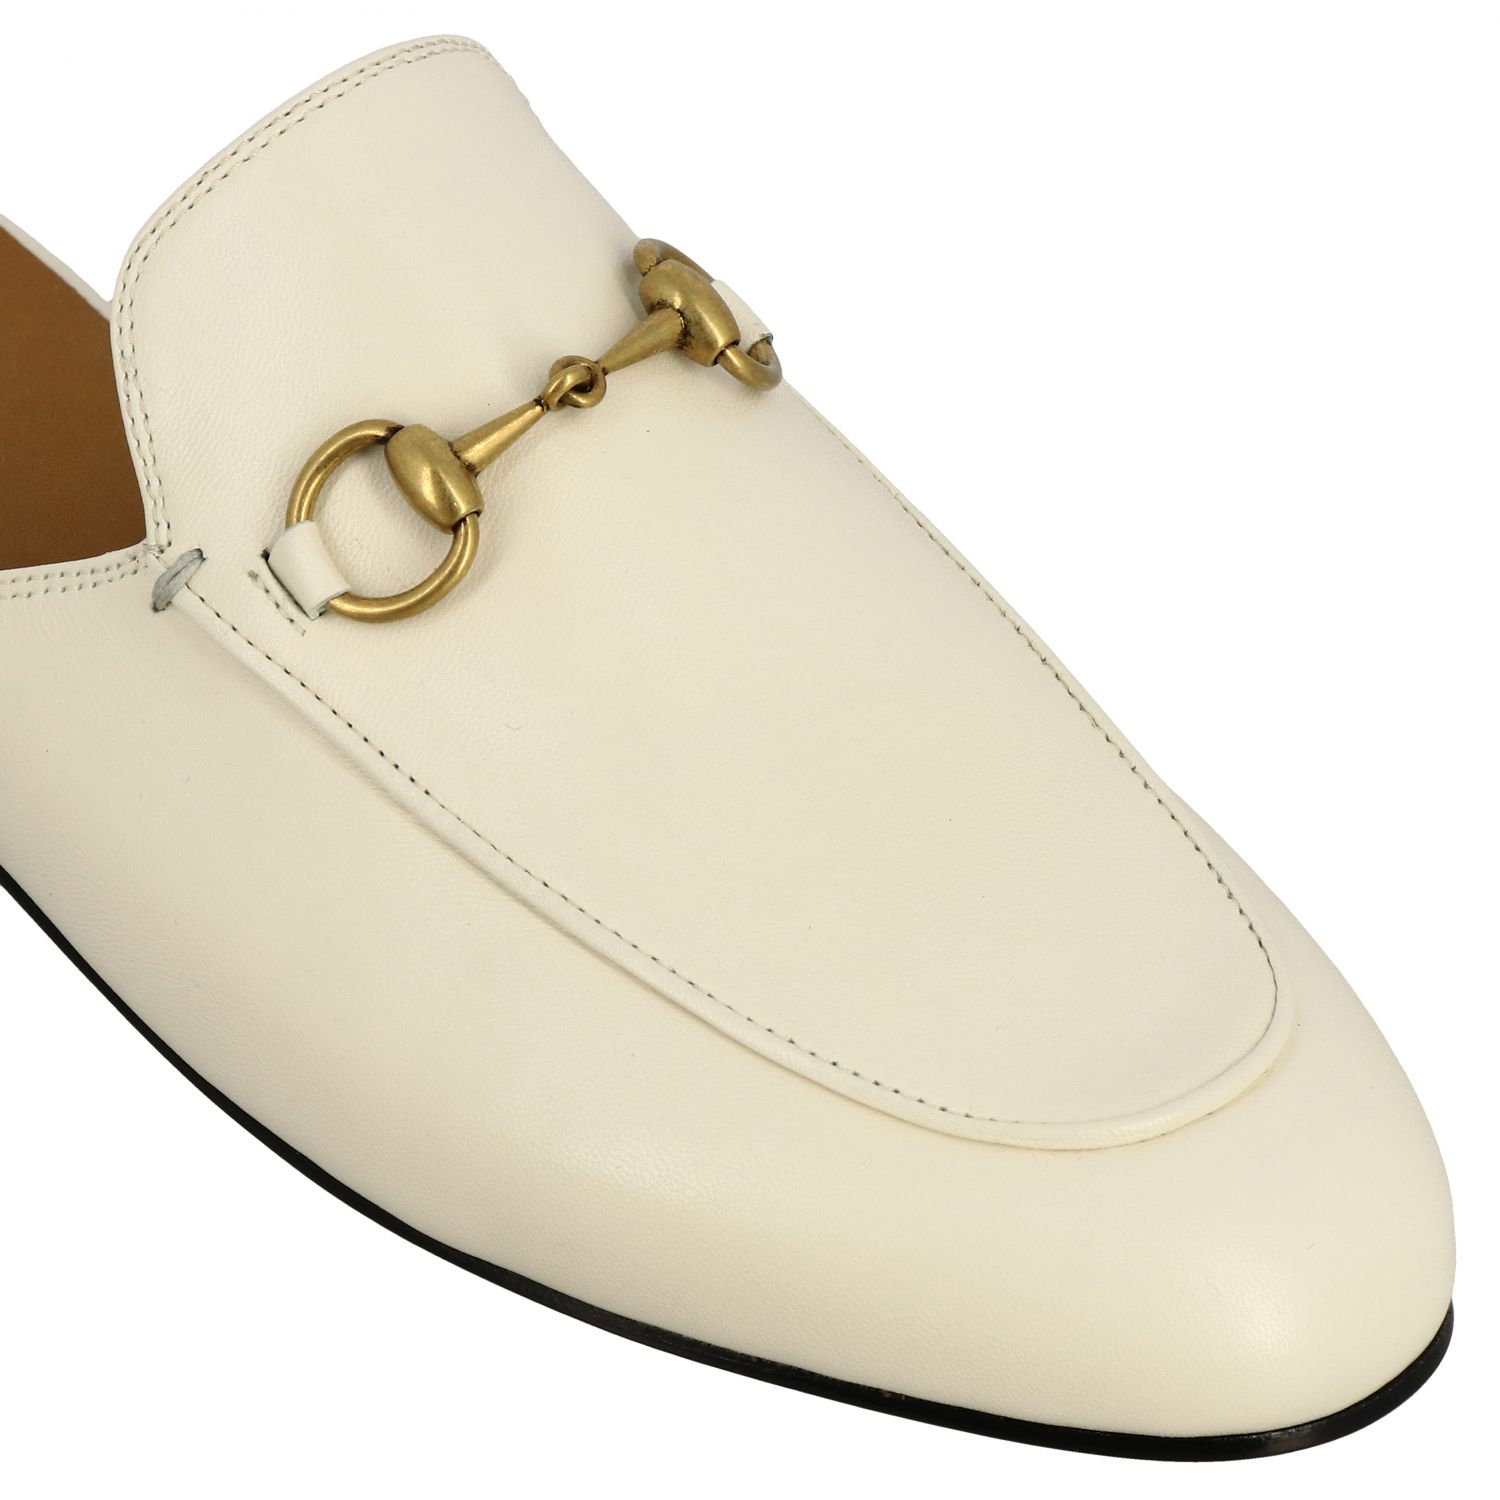 GUCCI: Princetown leather slipper with horsebit | Loafers Gucci 